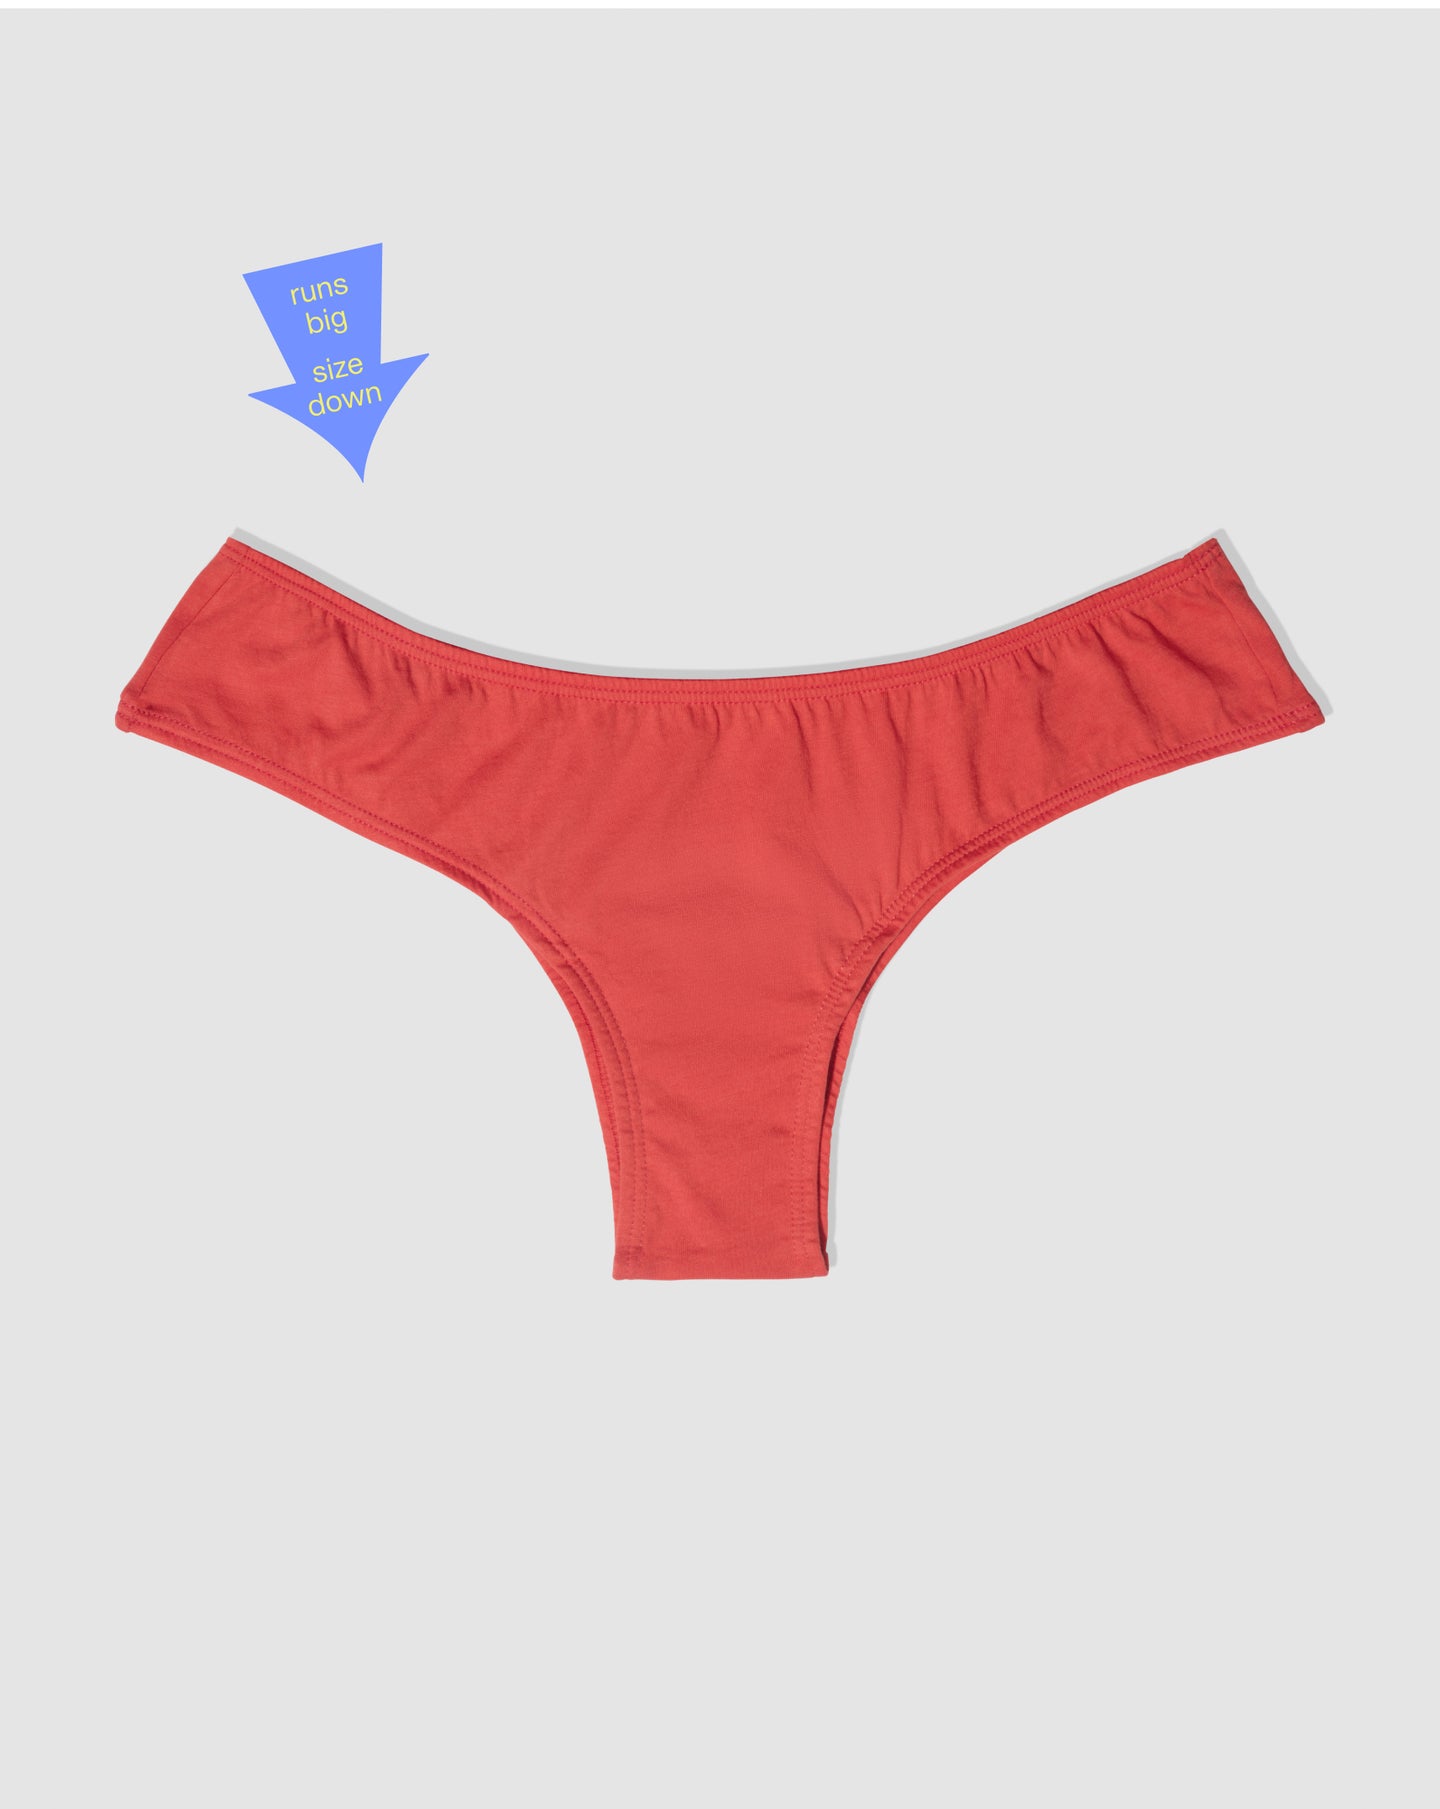 hipster − 100% organic. classic cotton hipster underwear